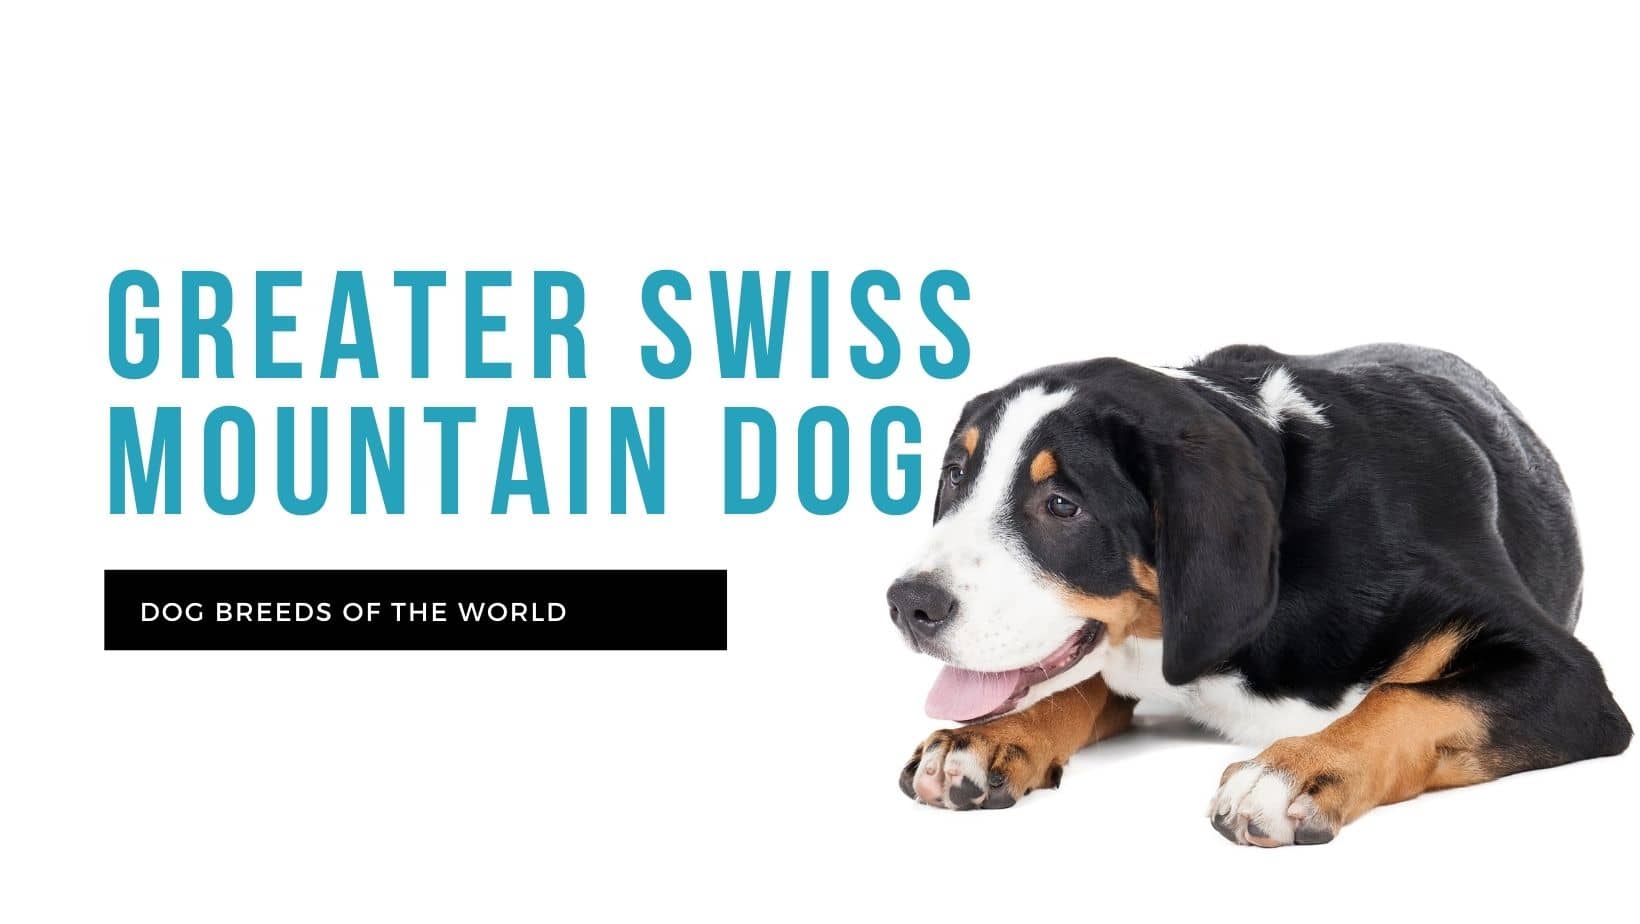 what is the rarest dog breed in switzerland